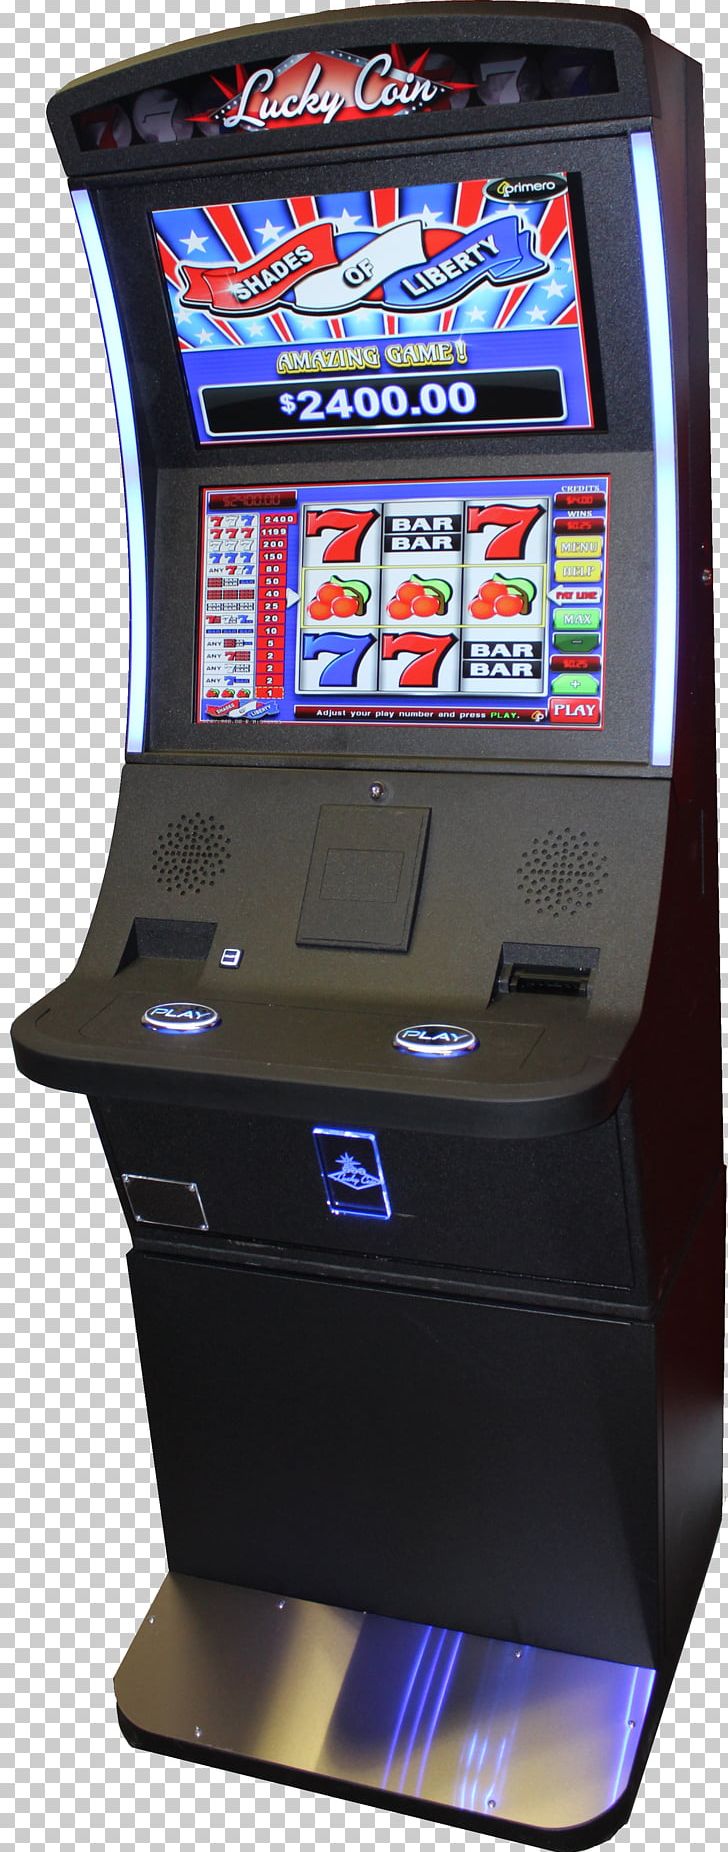 Arcade Cabinet Arcade Game Amusement Arcade Video Game PNG, Clipart, Amusement Arcade, Arcade Cabinet, Arcade Game, Coin, Display Device Free PNG Download